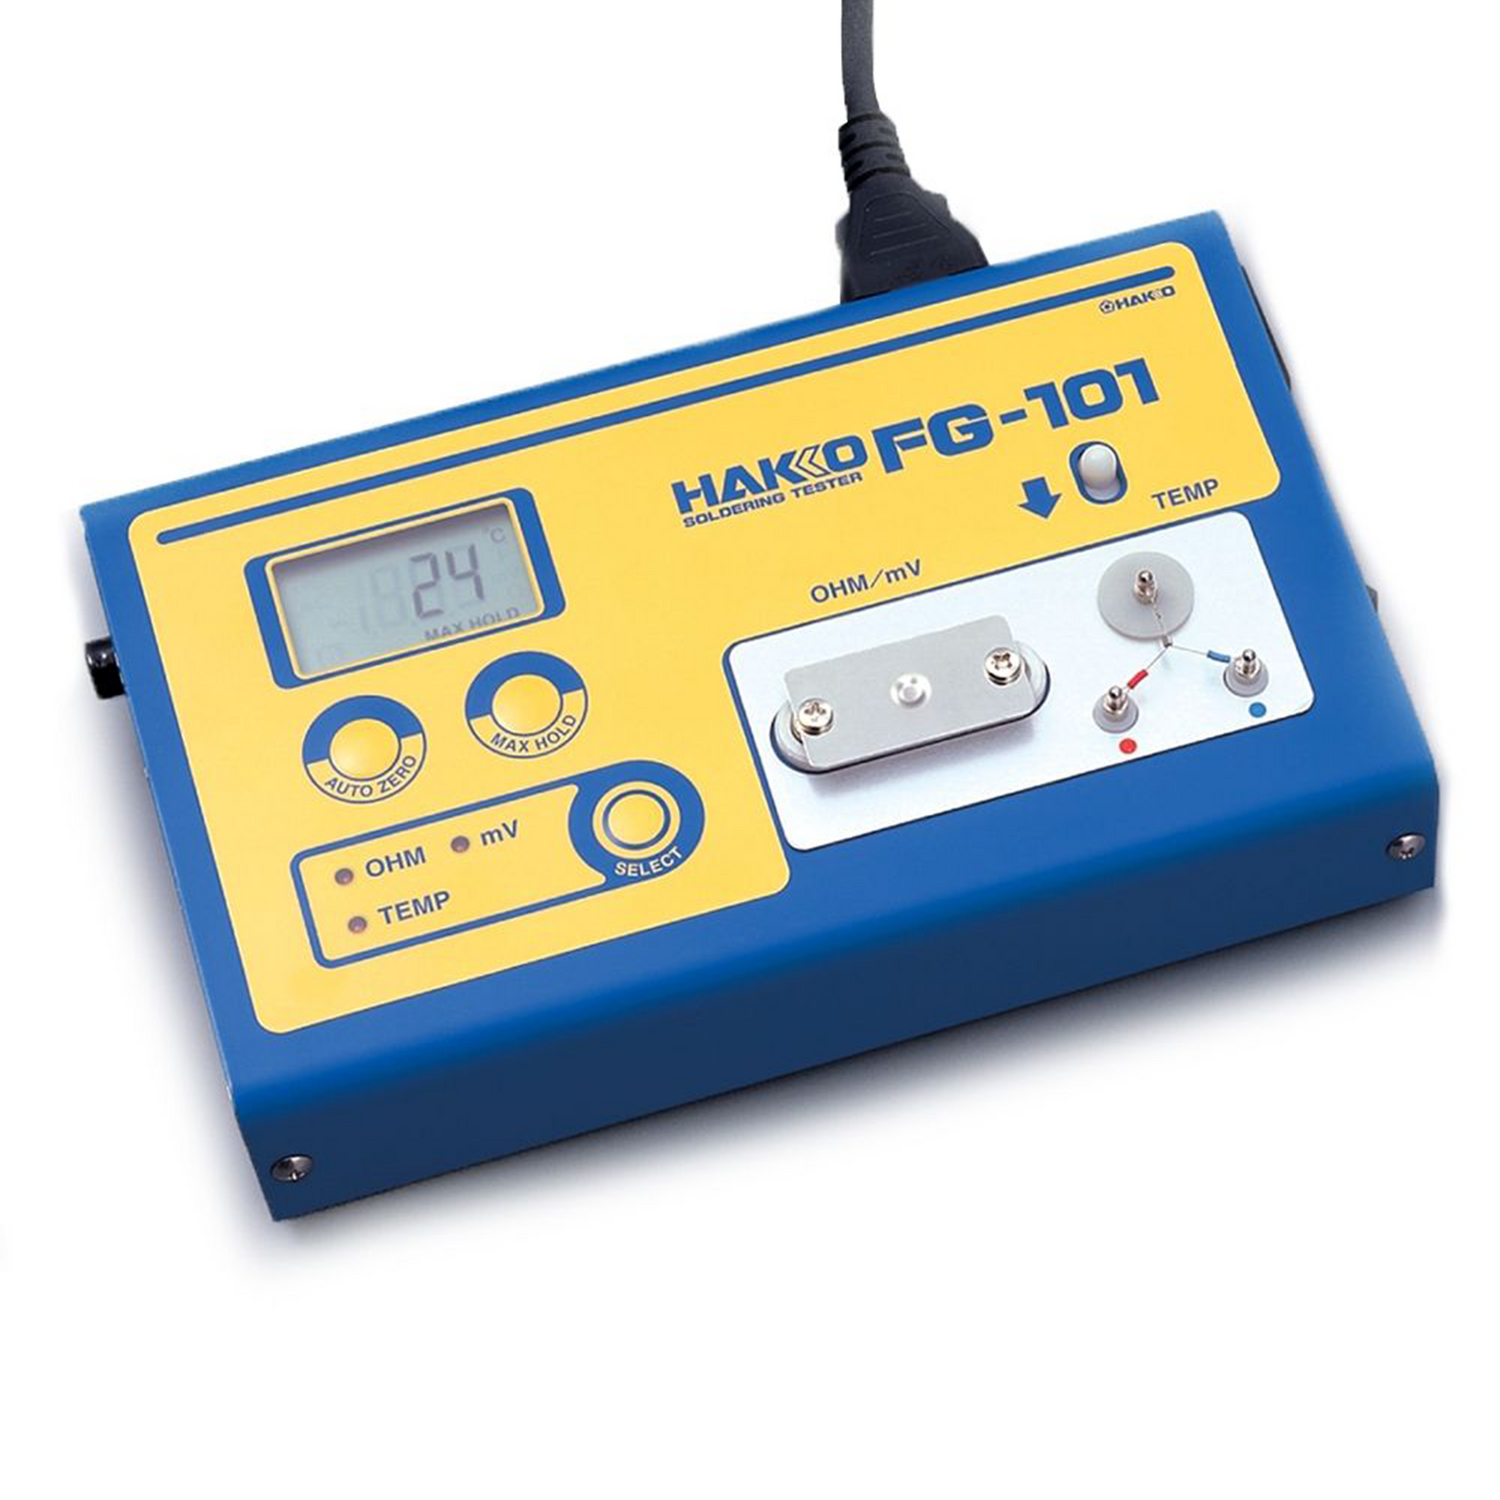 Hakko soldering iron tester with auto-measurement function. to measure tip temperature, leak voltage and top to ground resistance. ESD safe, human error free operation